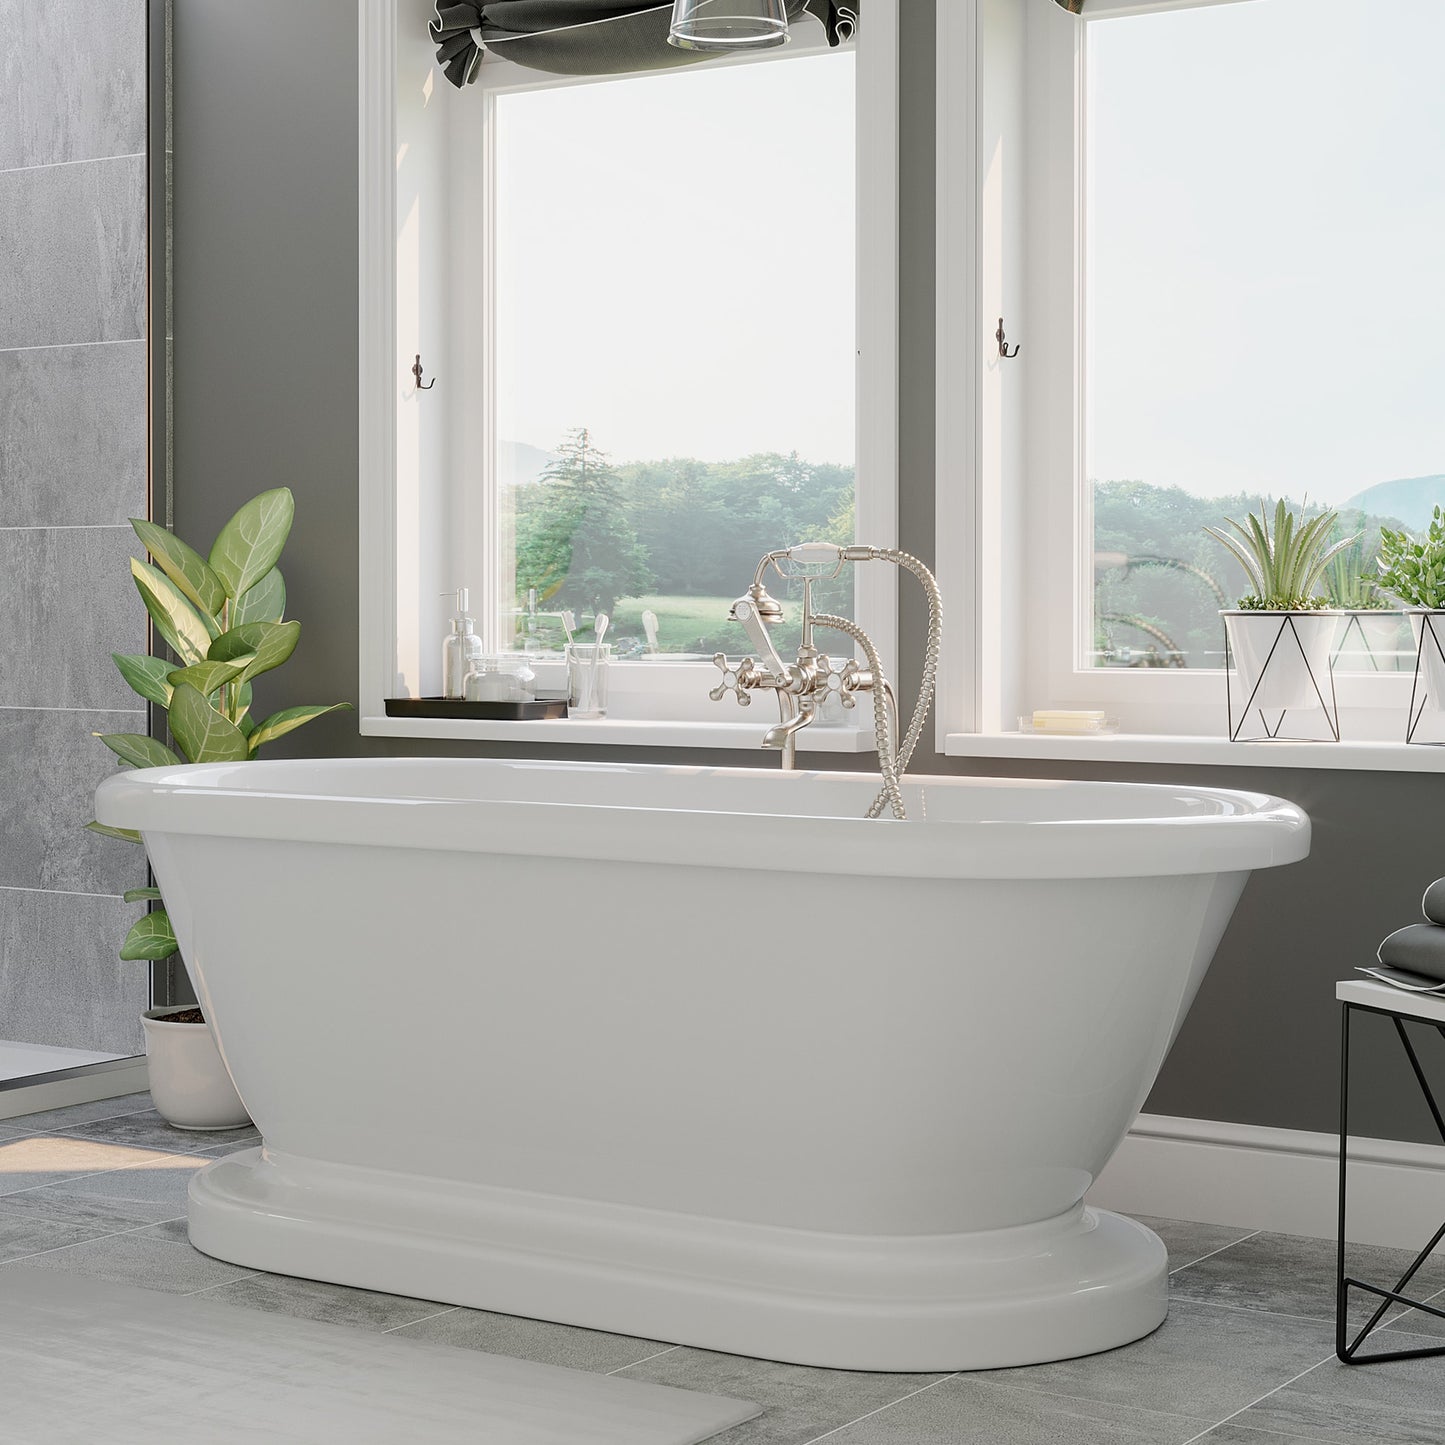 Acrylic Double Ended Pedestal Bathtub with Continuous Rim and Complete Brushed Nickel Plumbing Package - ADEP-398463-PKG-BN-NH